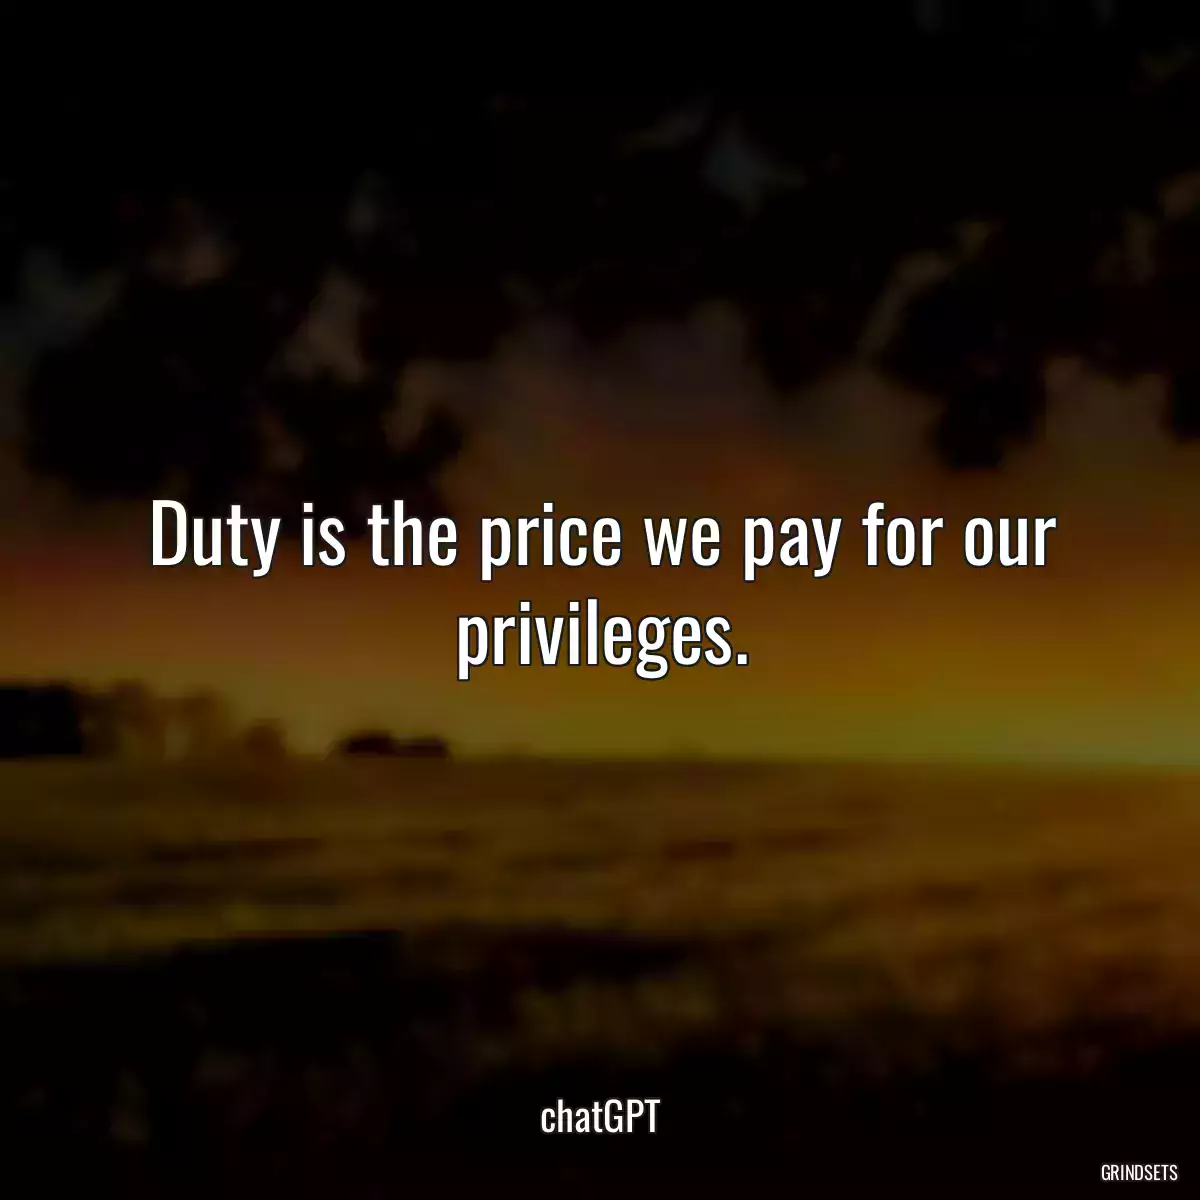 Duty is the price we pay for our privileges.